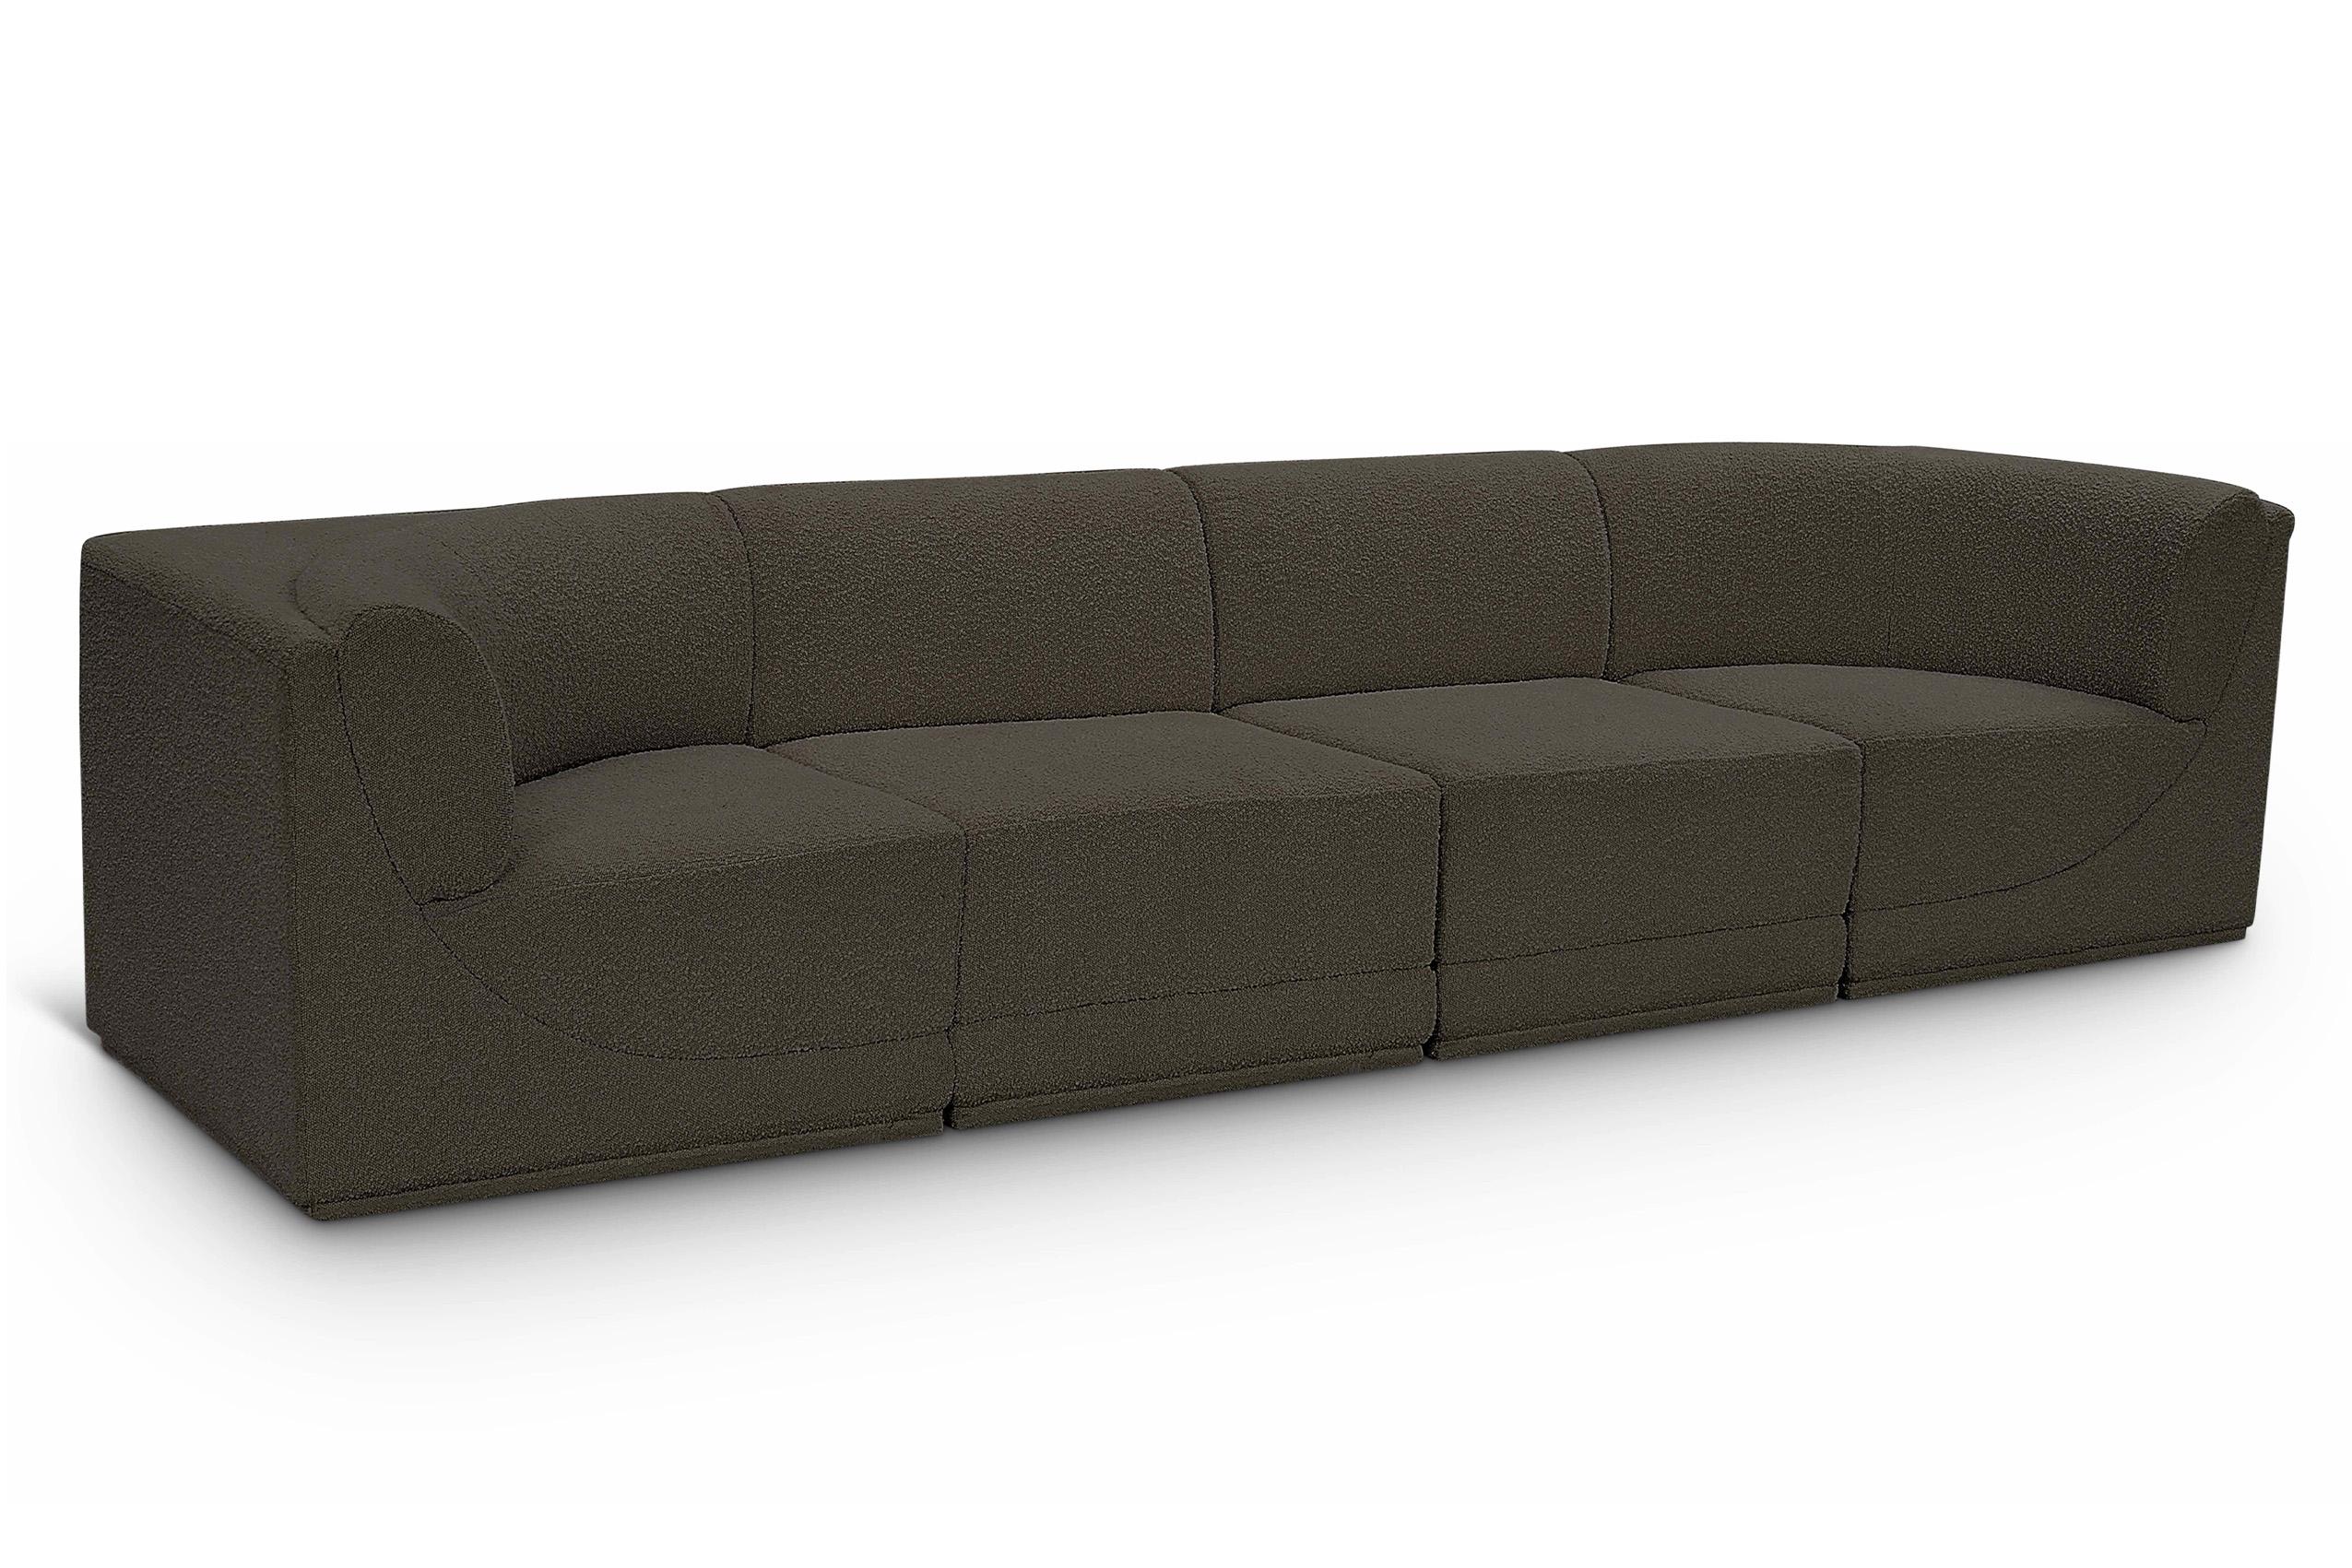 Contemporary, Modern Modular Sofa Ollie 118Brown-S128 118Brown-S128 in Brown 